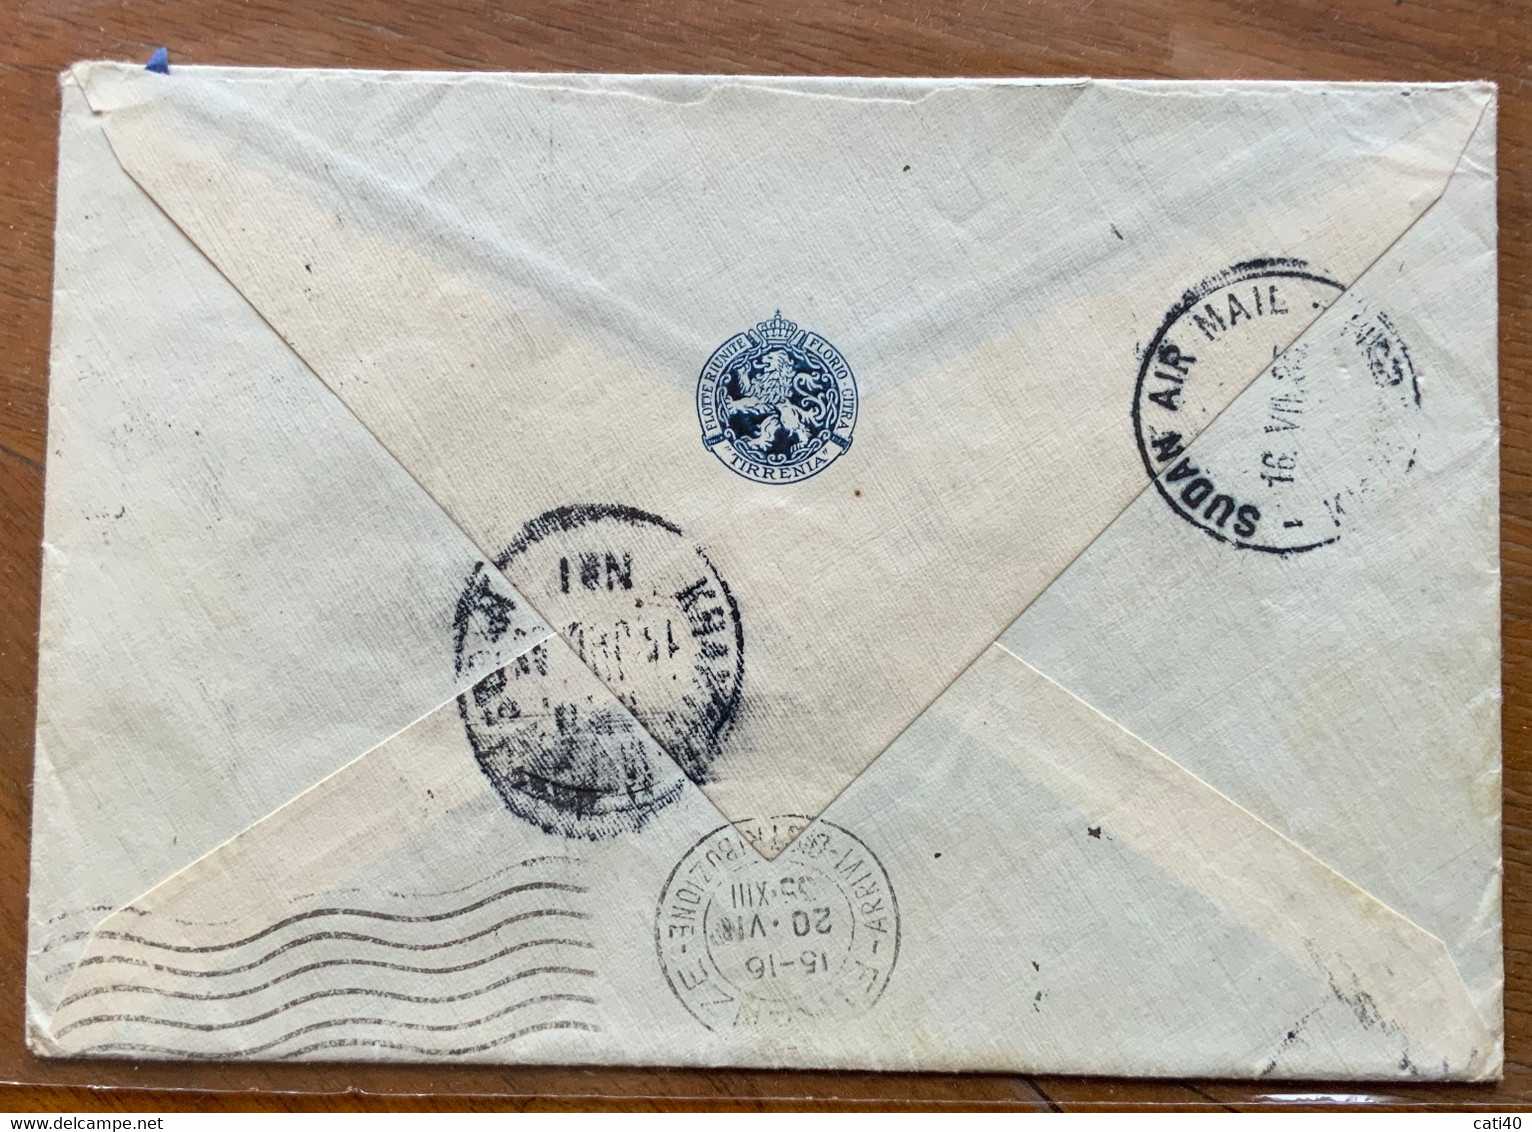 FLOTTE RIUNITE FLORIO - CITRA - TIRRENIA - SUD AN AIR MAIL With 3 PIASTRES/4,5   FROM PORT SAID 13 VII 35  TO FIRENZE - Sud-Soudan